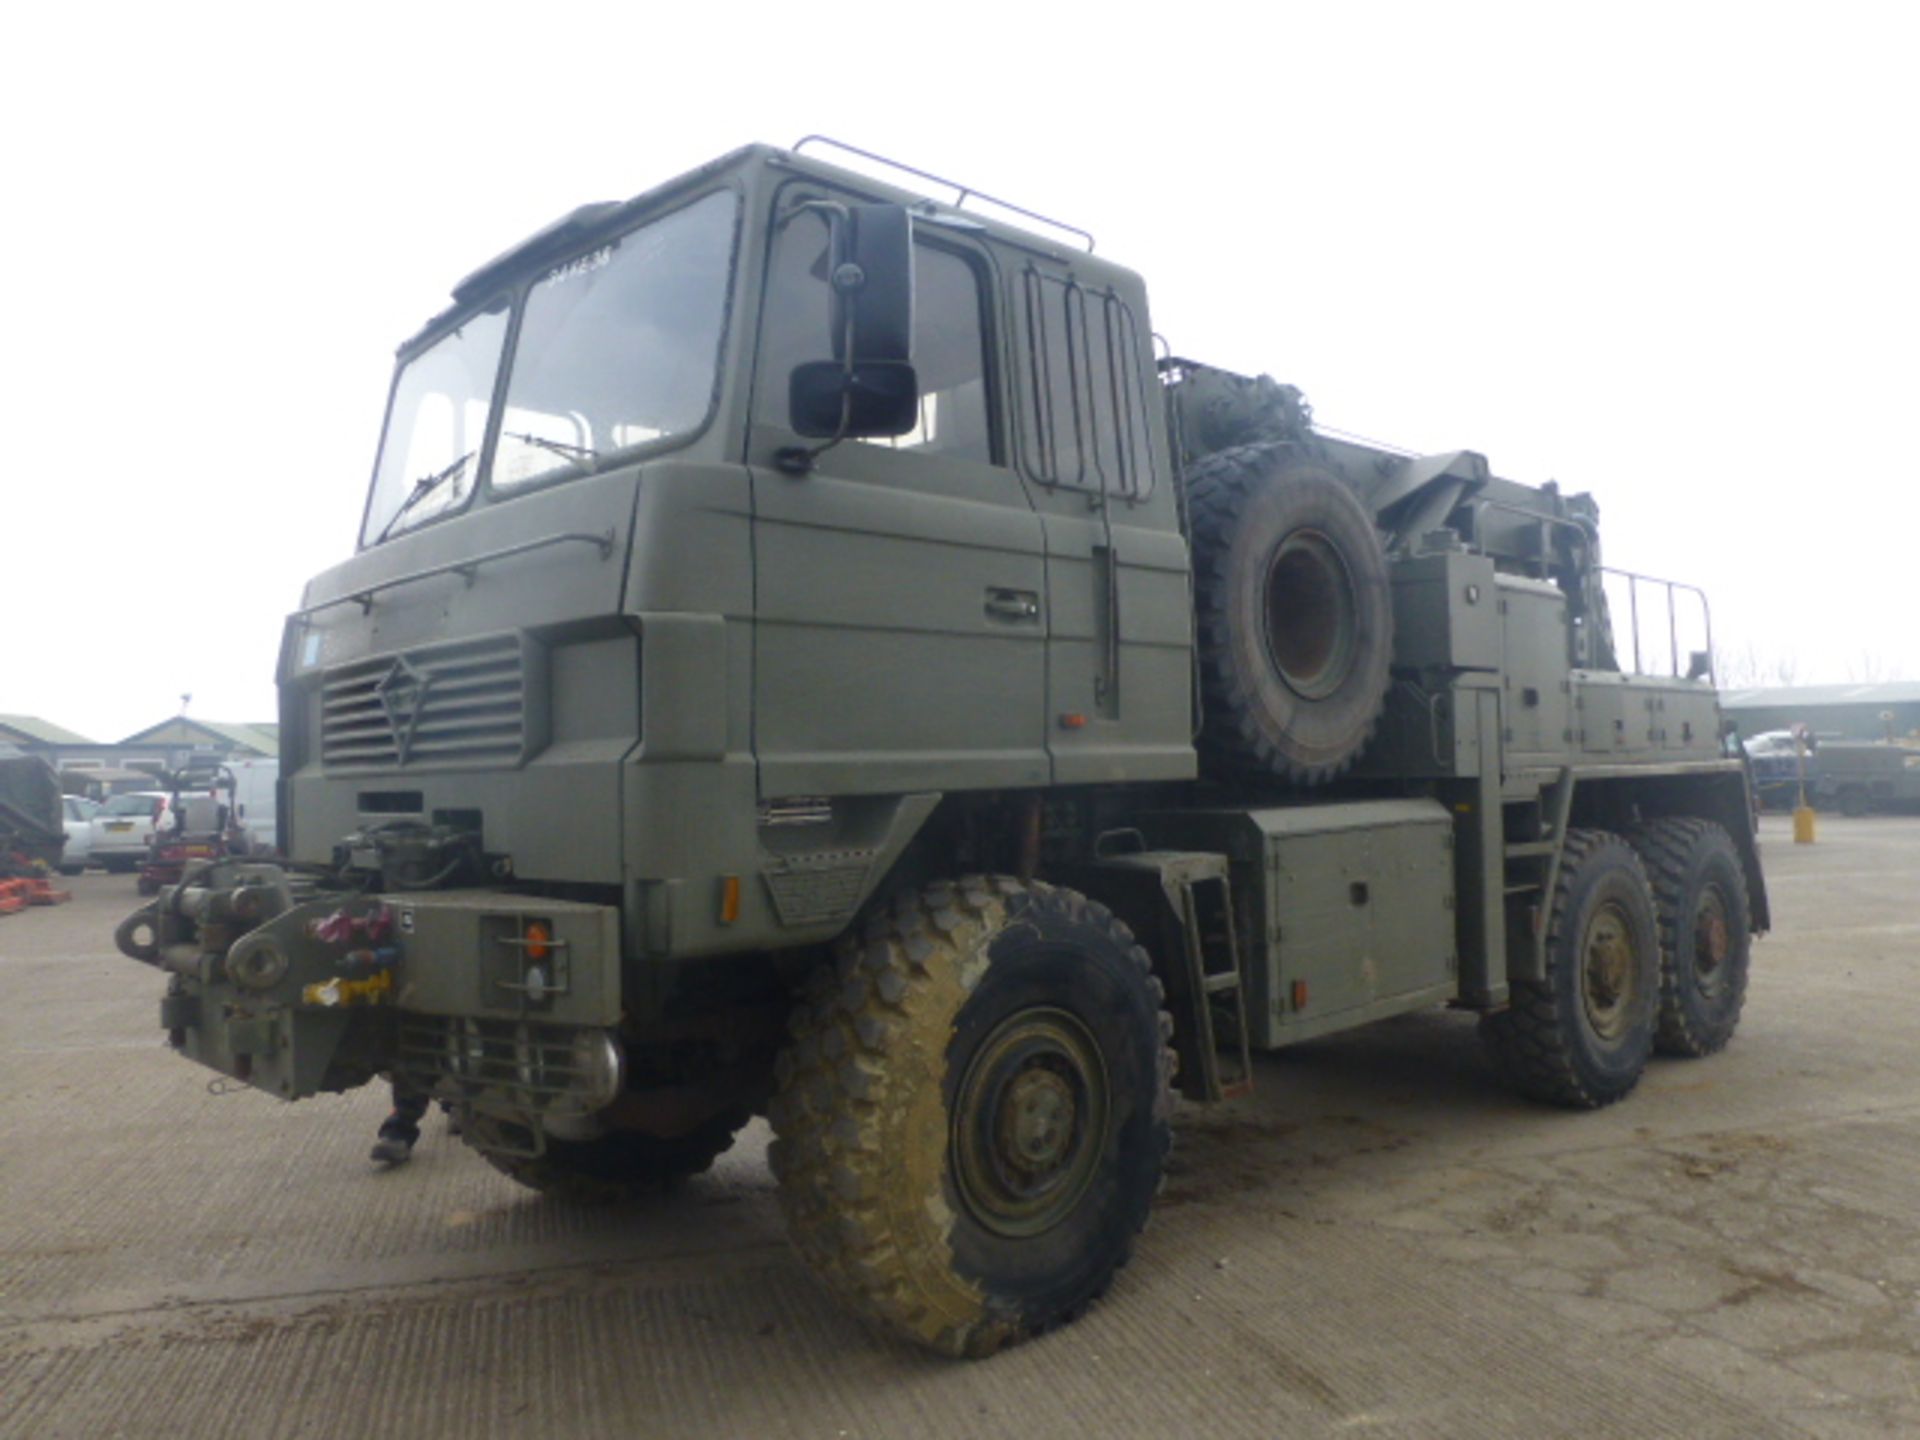 Foden 6x6 Recovery Vehicle - Image 12 of 18